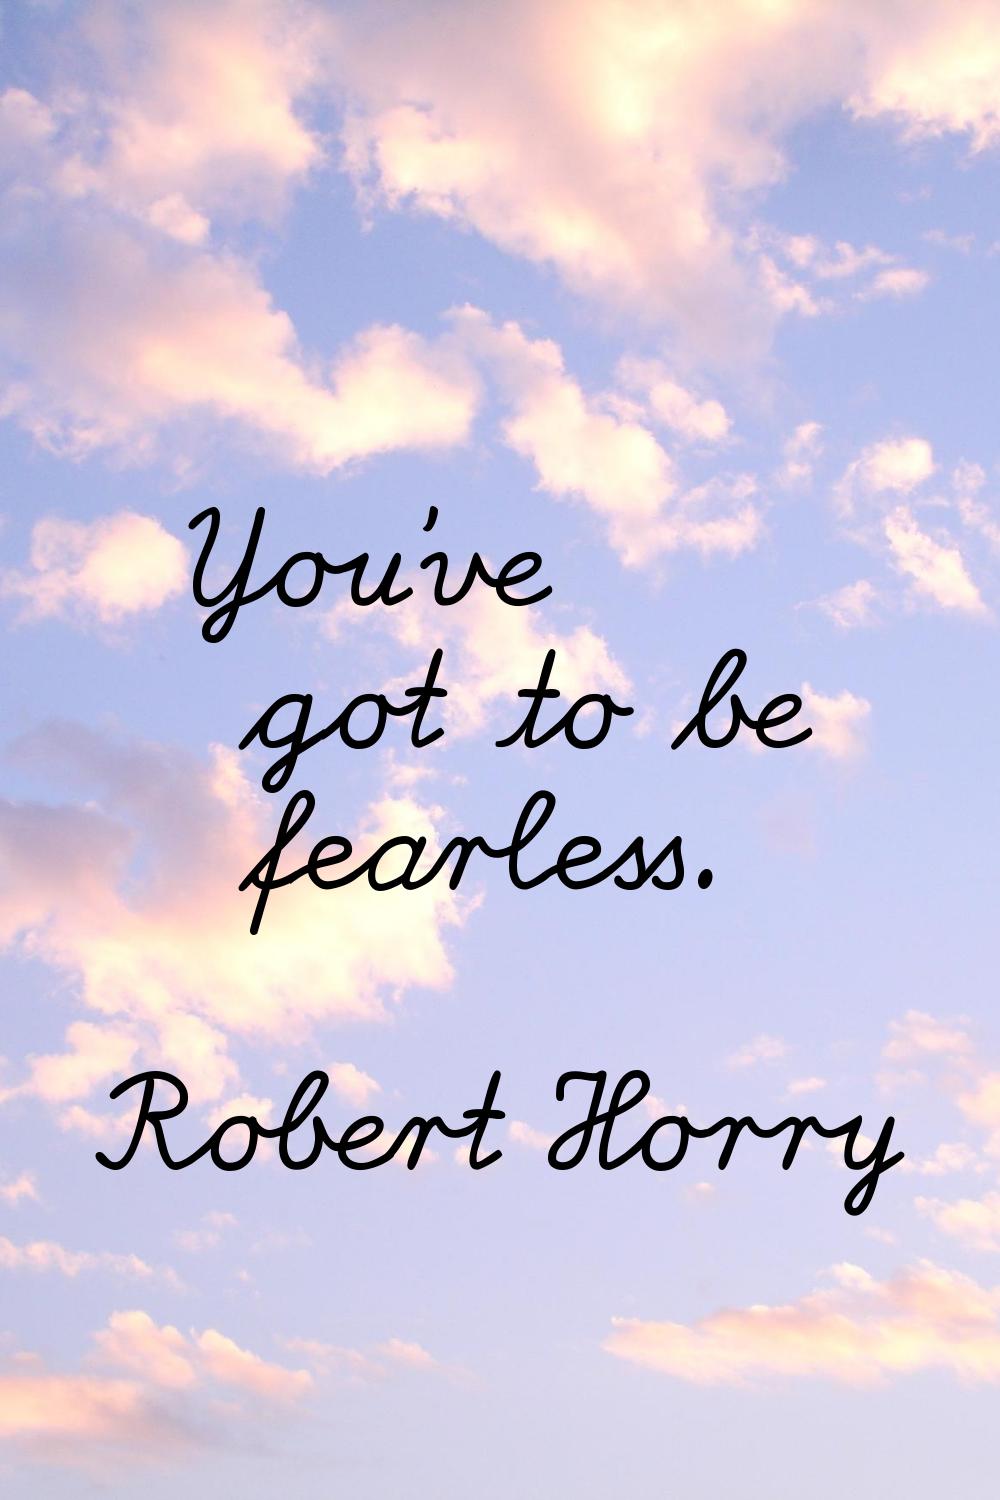 You've got to be fearless.